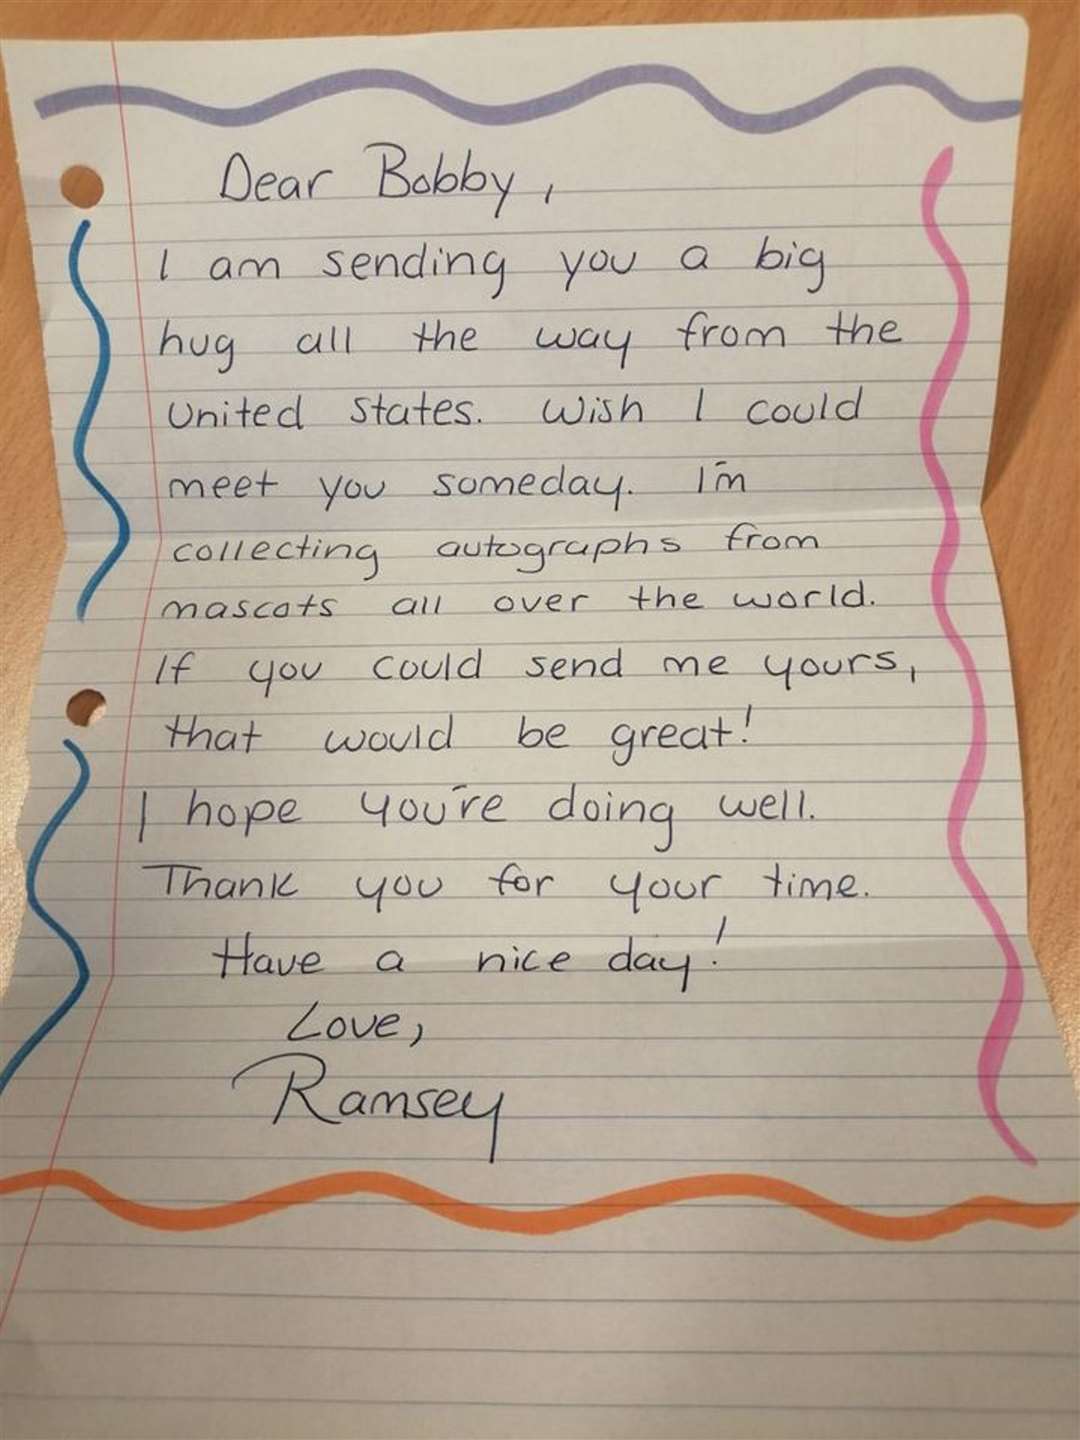 The letter from a fan in the USA.